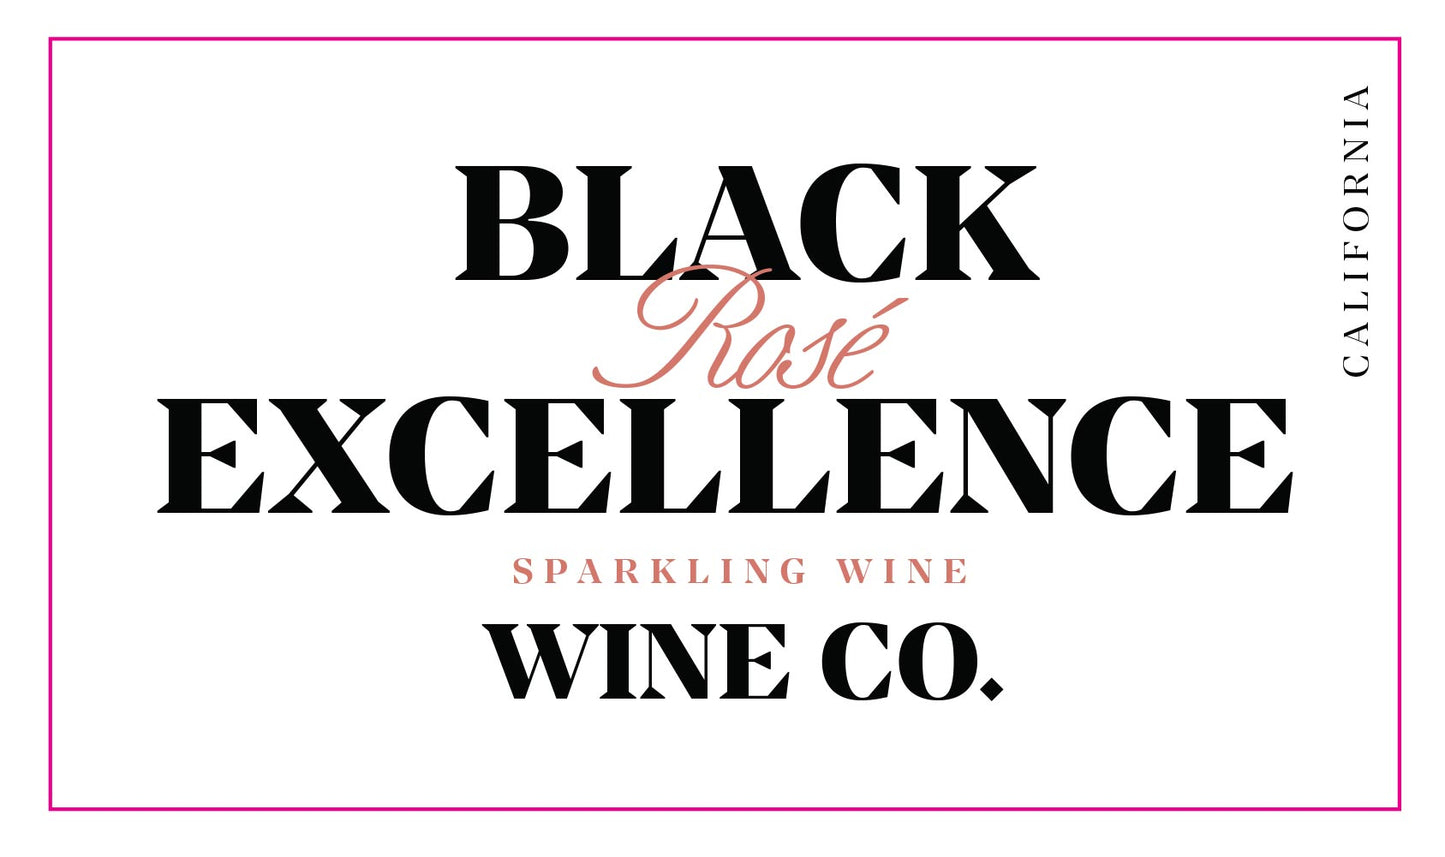 Sparkling Rose Wine For Sale, Black Excellence Wine Co, California